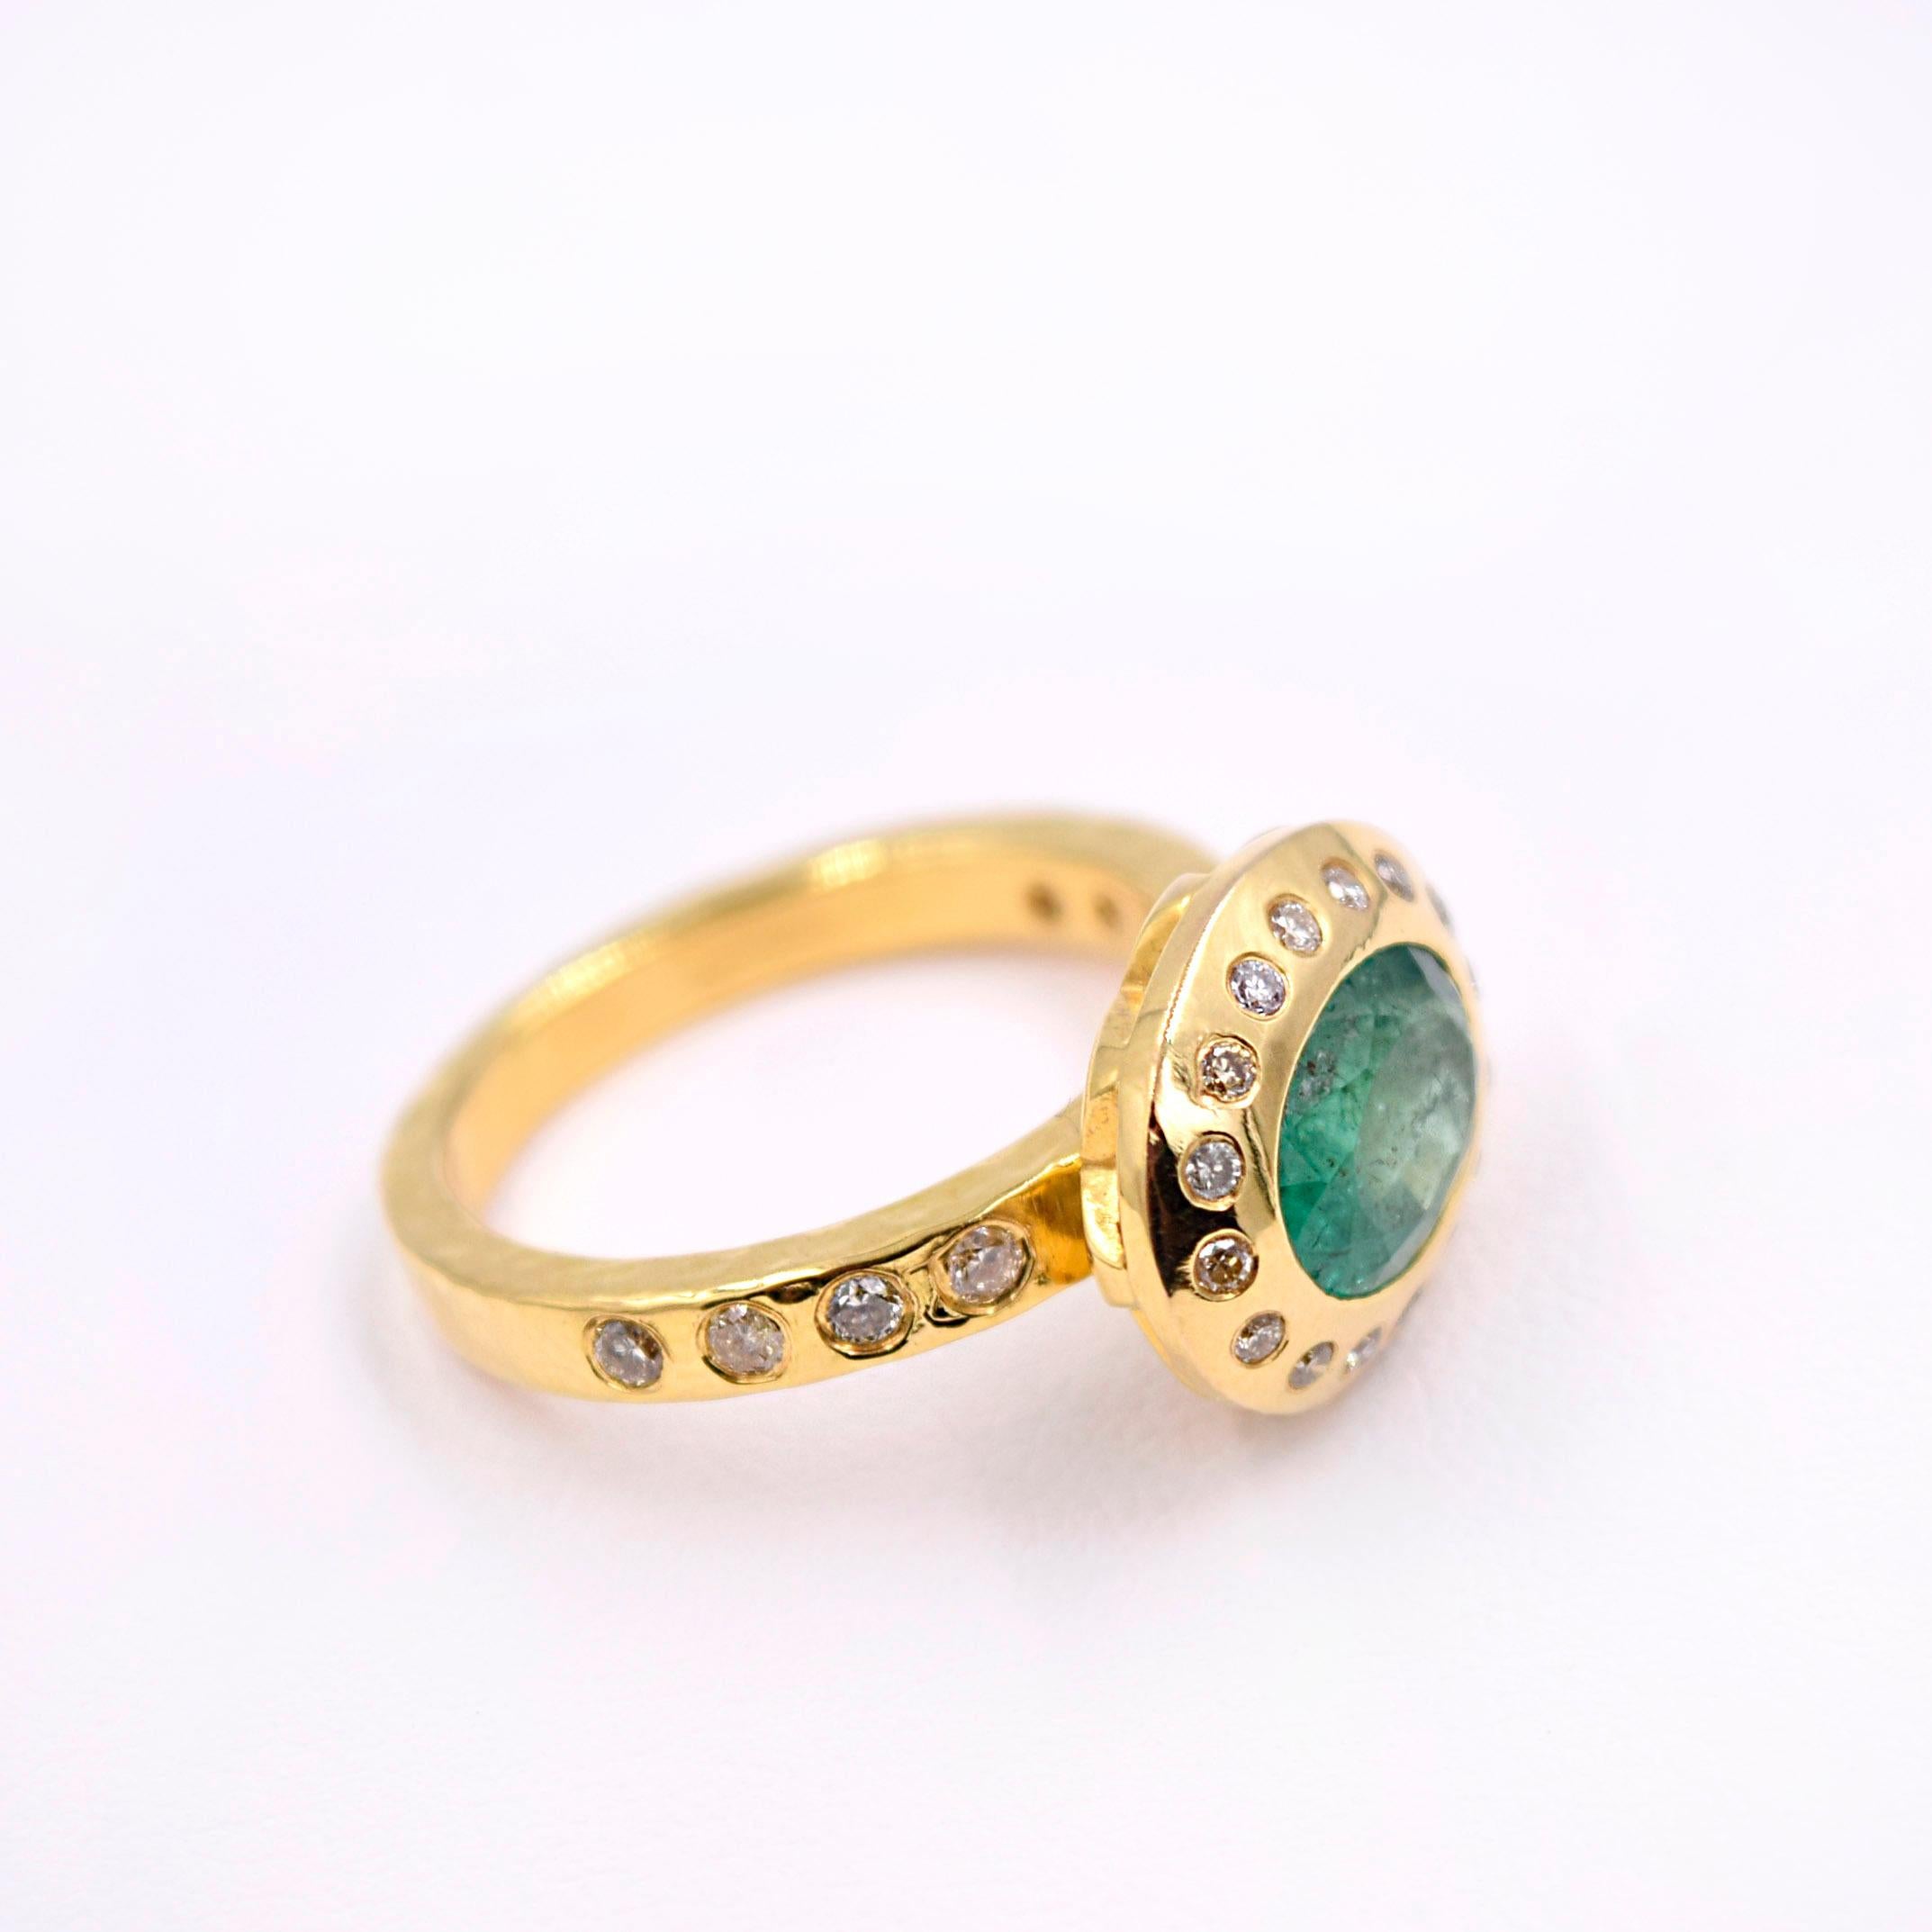 Tsavorite and Diamond Cocktail Ring in 18K Yellow Gold designed by Kanwar Singh.
Size of the ring is 6.5 and can be sized.
High polished finish.

